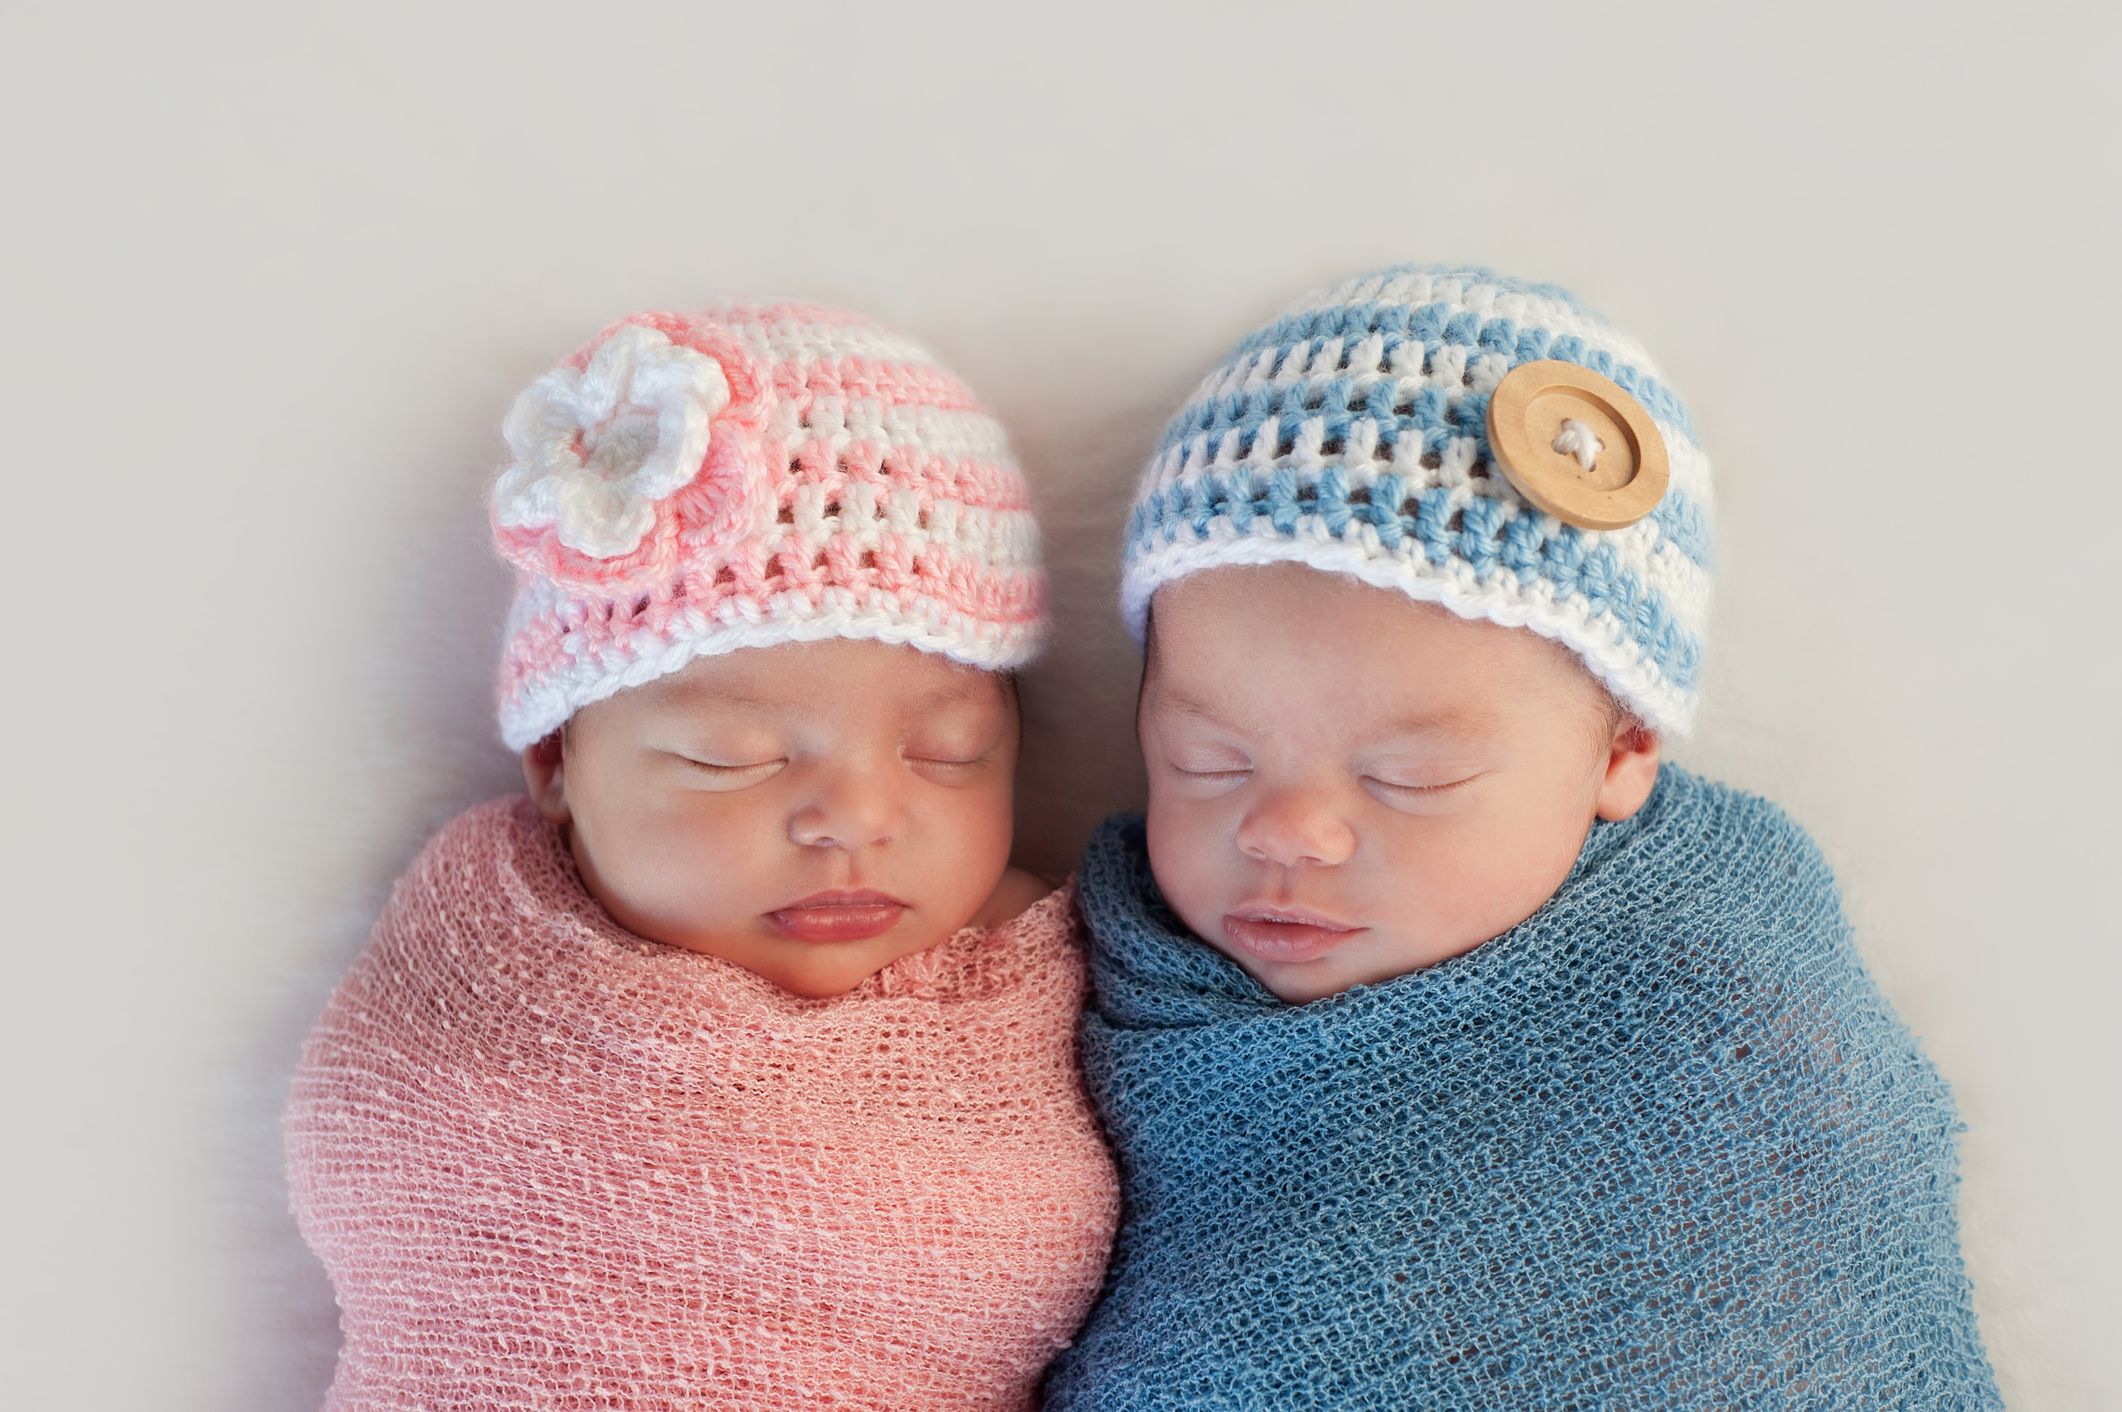 Twin names: baby names for twin girls, twin boys and mixed twins